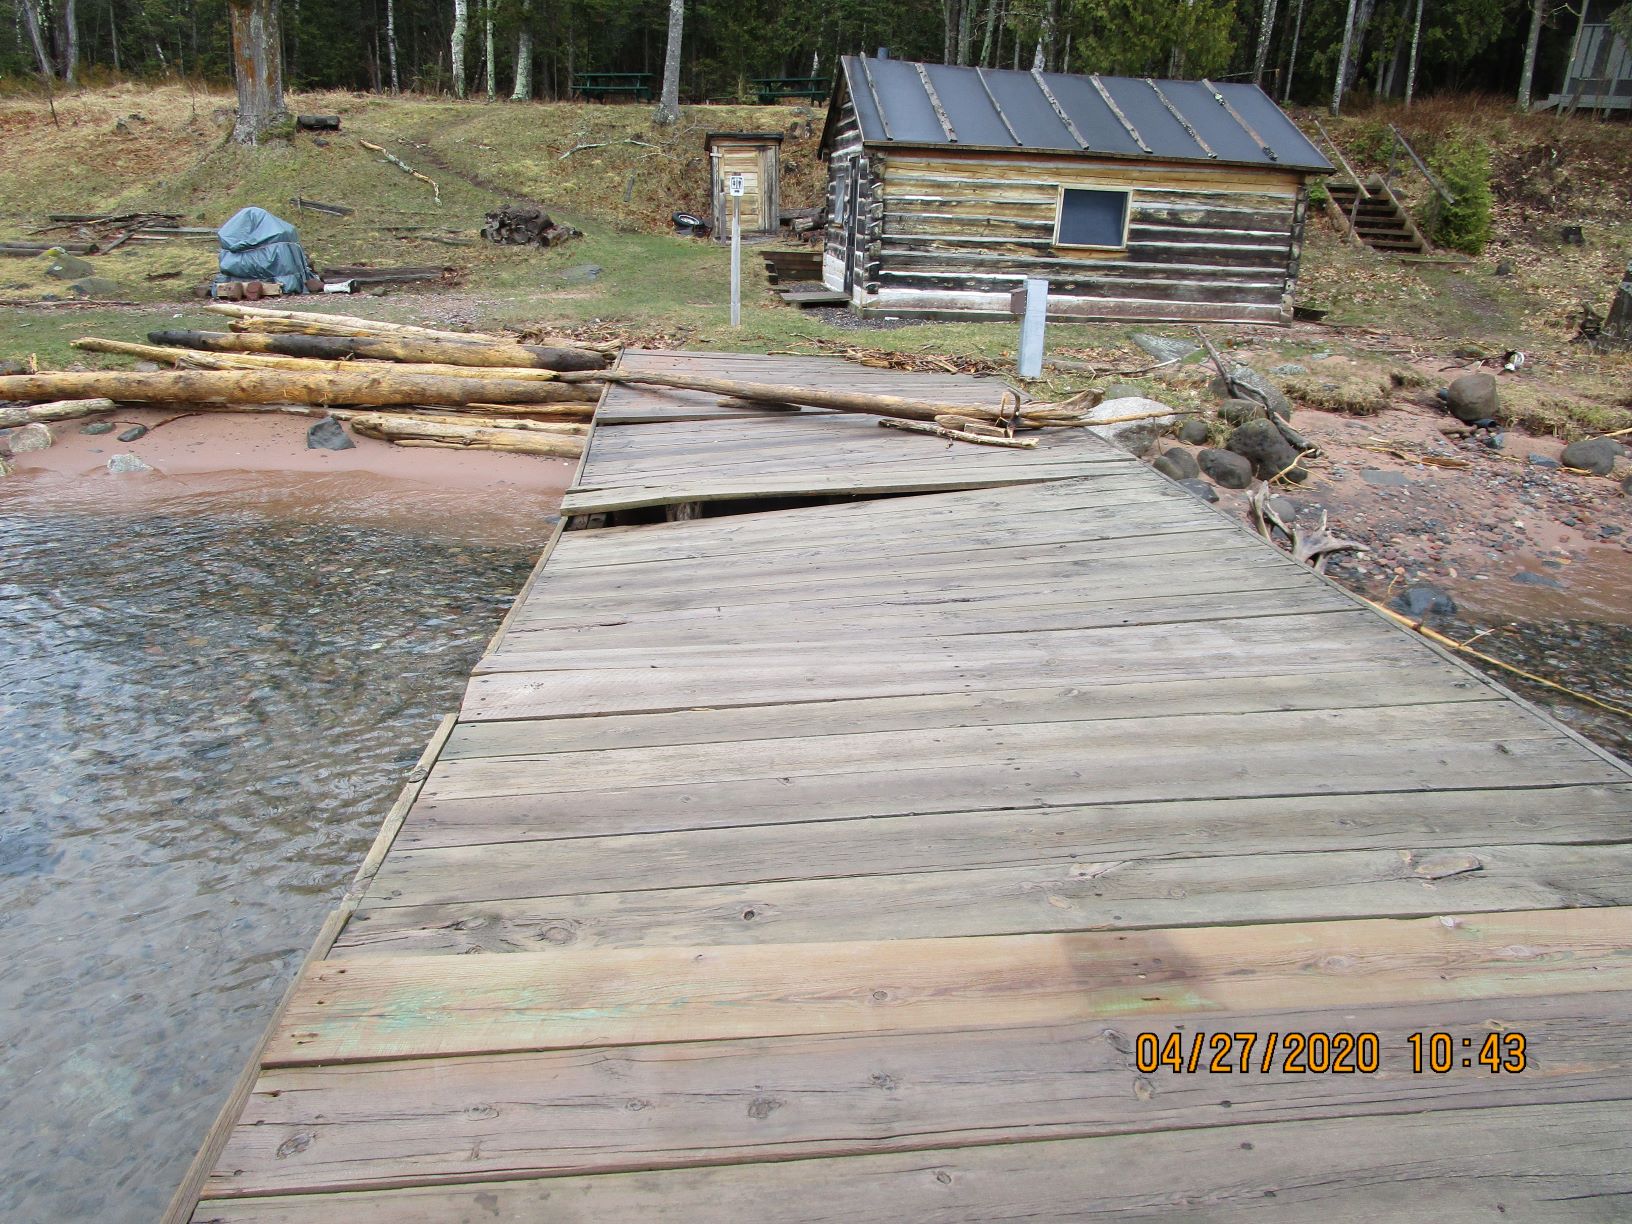 A wooden dock is twisted at an angle with boards pulled up and debris.